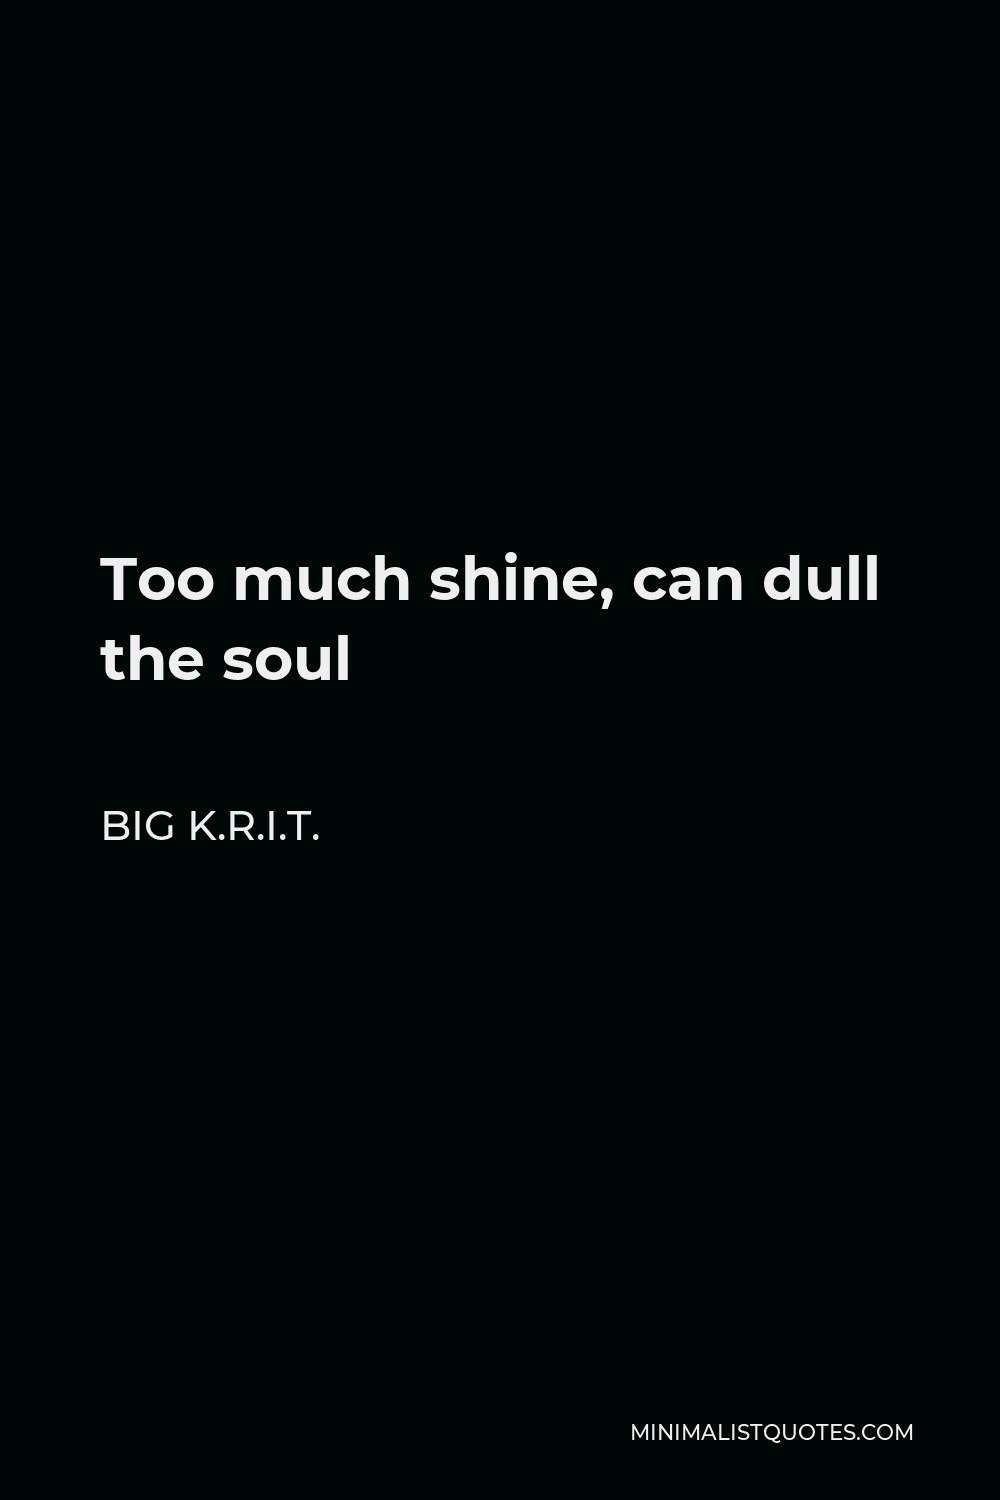 Big K.R.I.T. Quote - Too much shine, can dull the soul